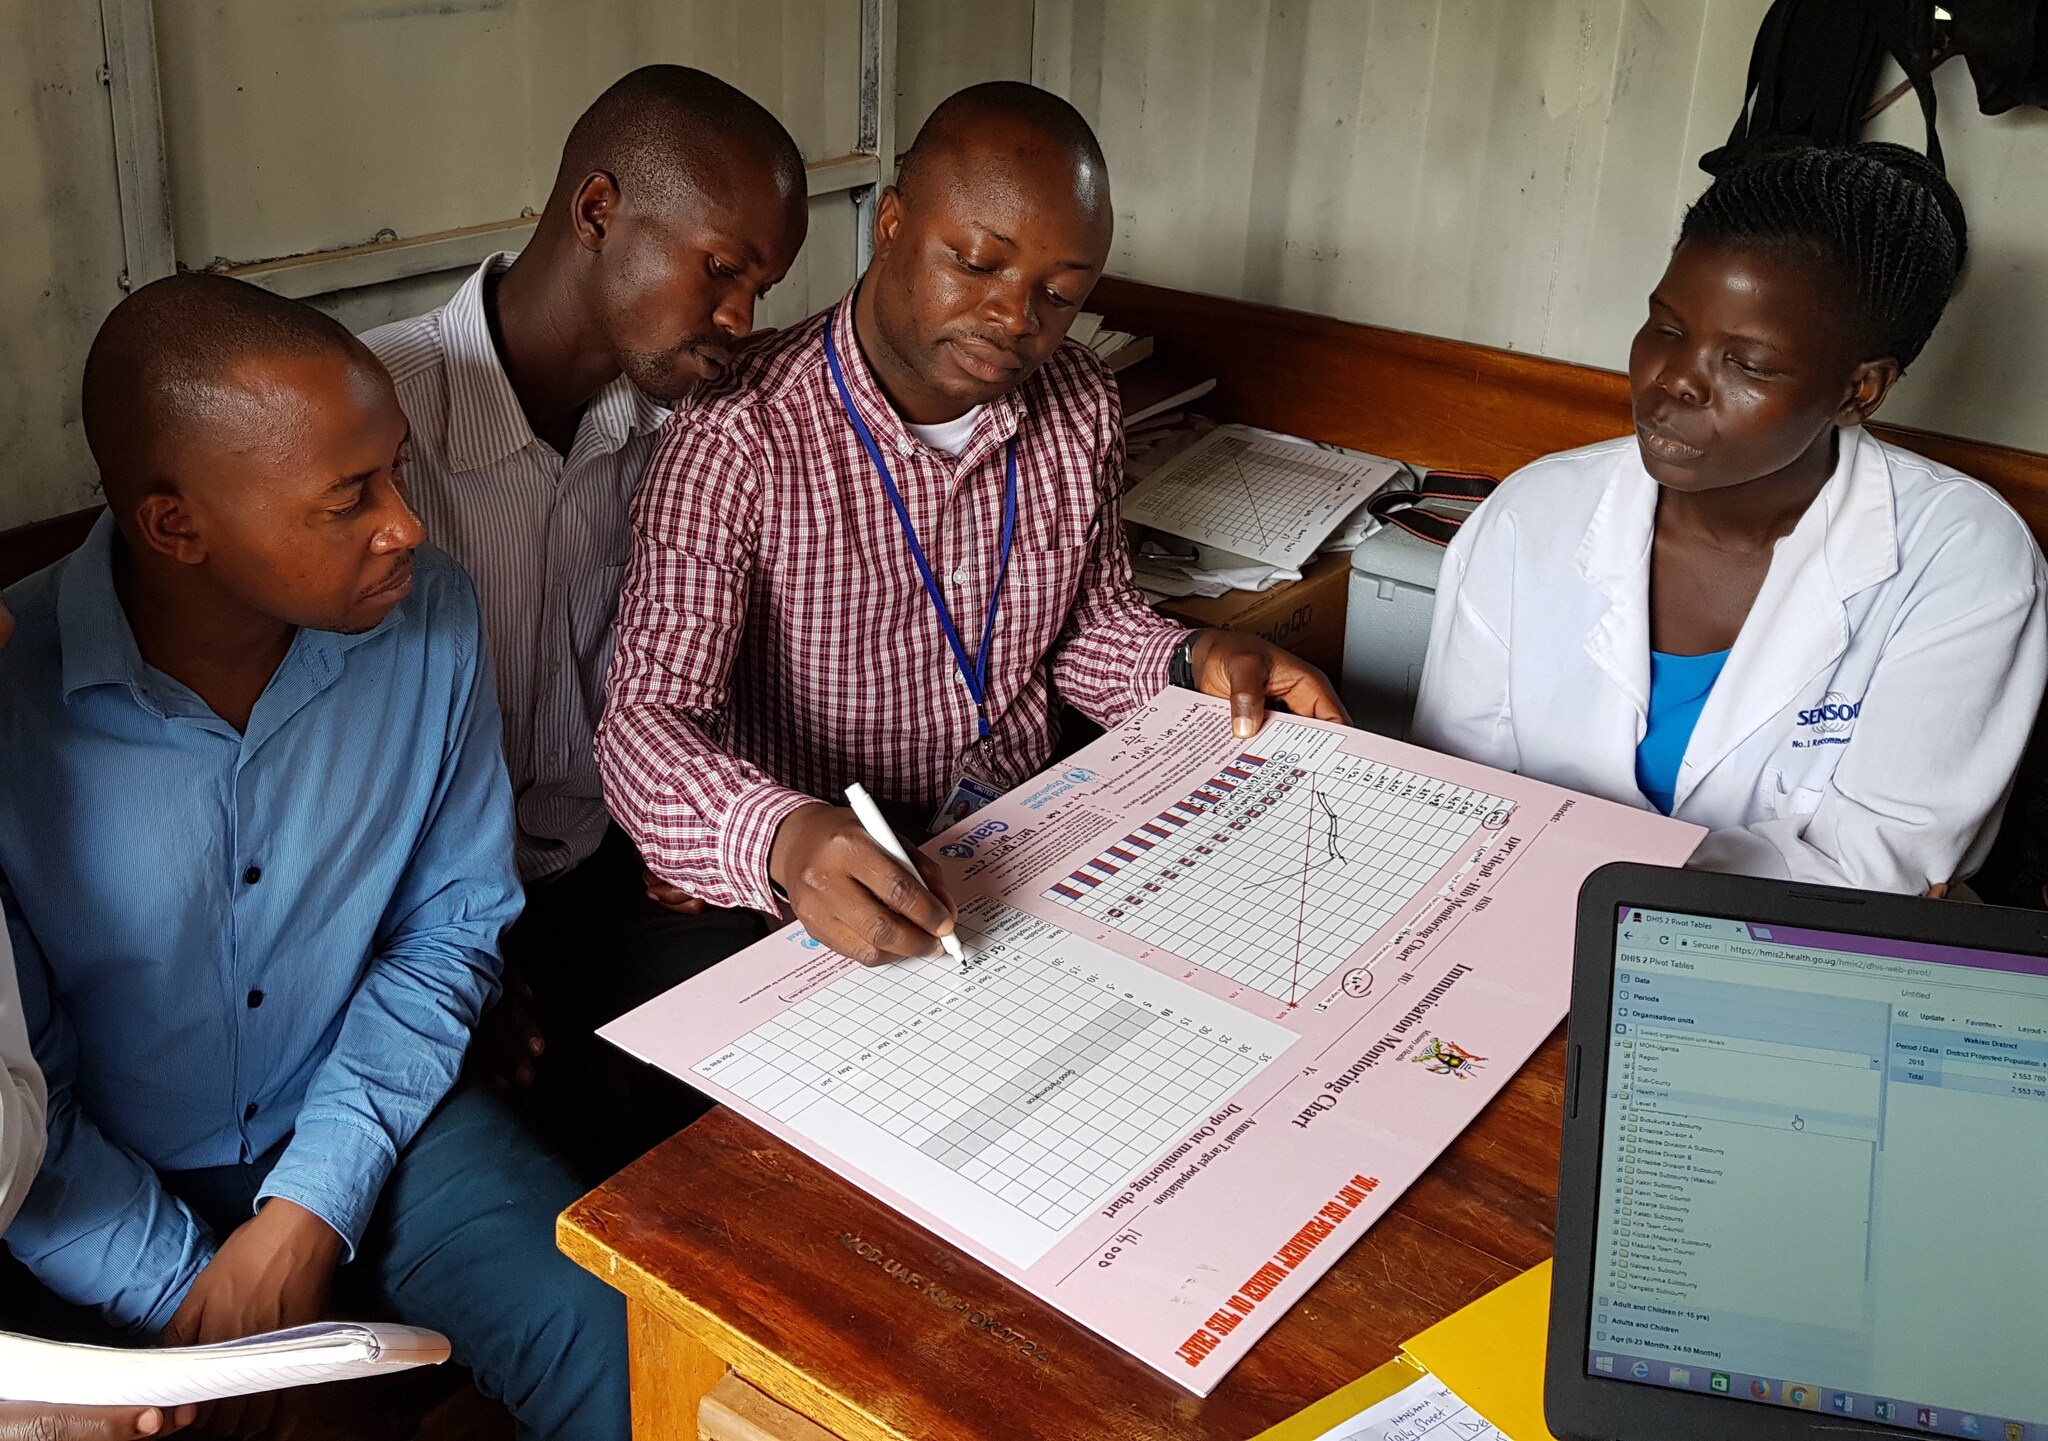 STOP participant training health workers in Uganda on completing vaccine monitoring charts